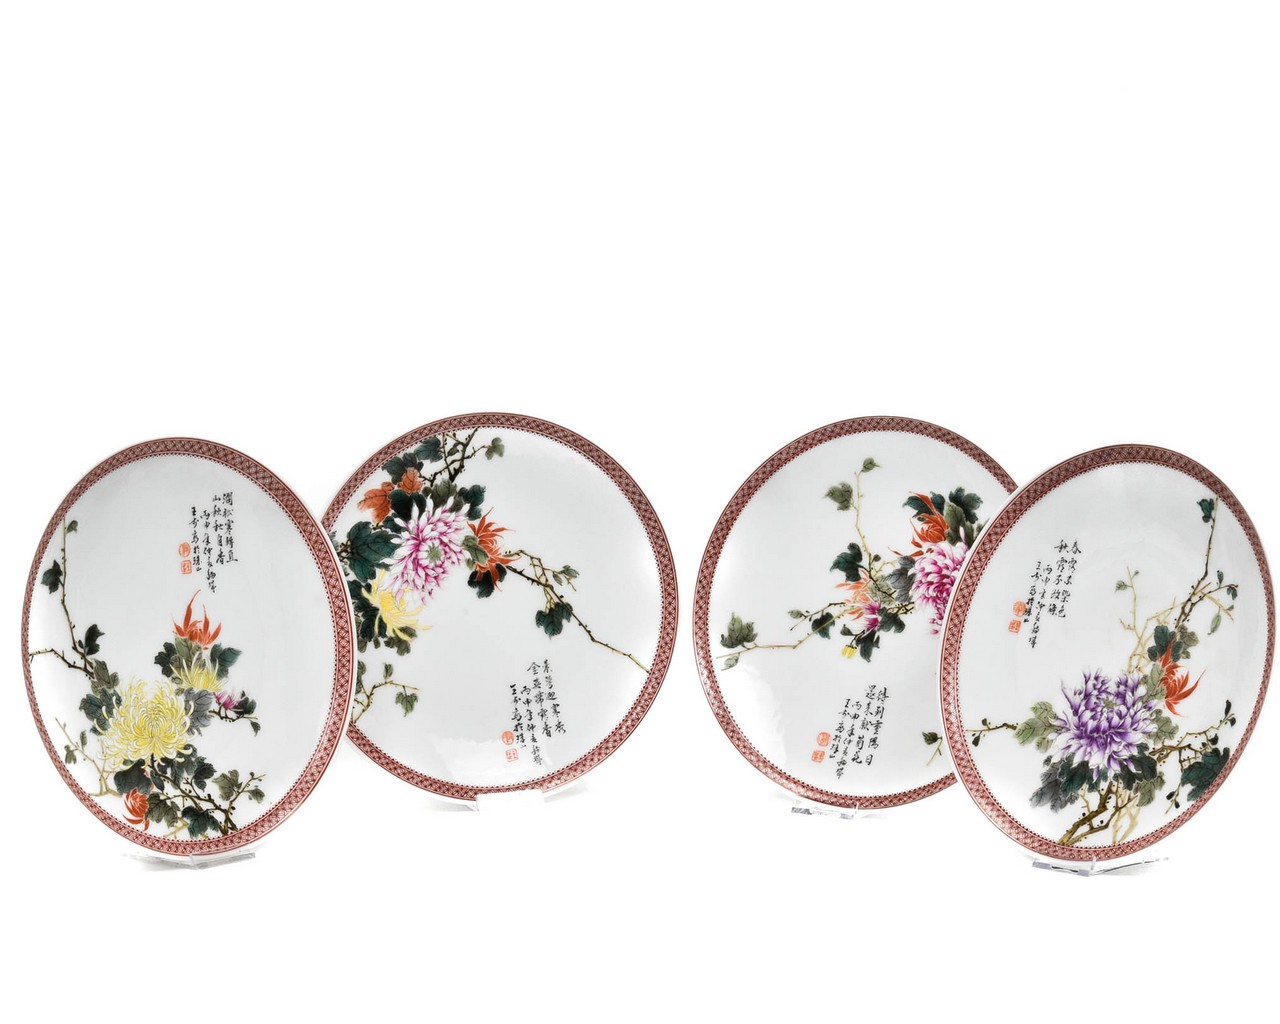 SUPERB SET OF FOUR CHINESE PORCELAIN PLATES